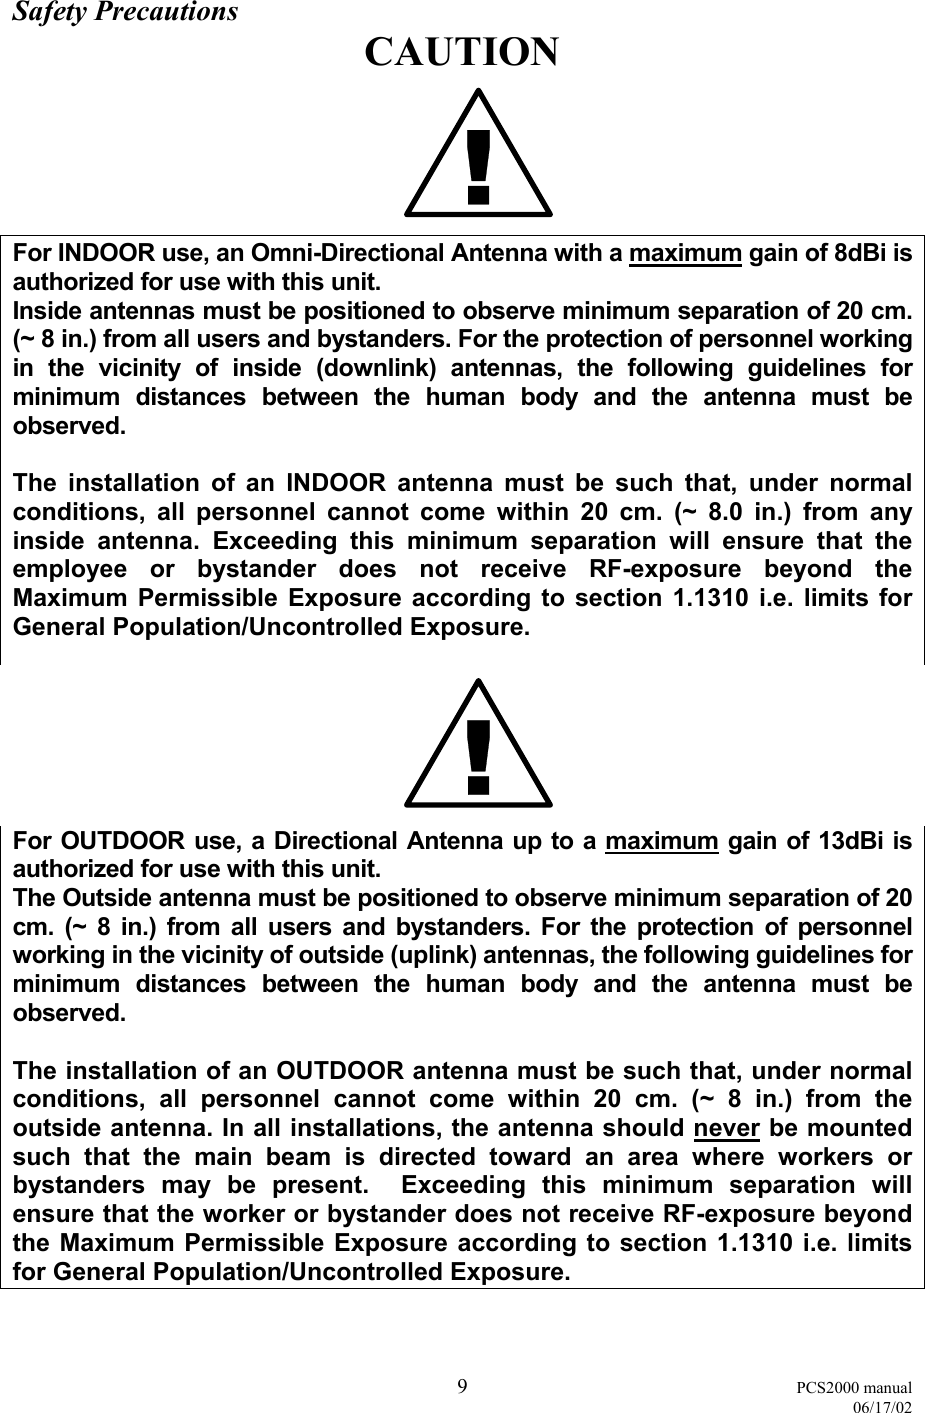  9 PCS2000 manual   06/17/02 Safety Precautions CAUTION For INDOOR use, an Omni-Directional Antenna with a maximum gain of 8dBi is authorized for use with this unit. Inside antennas must be positioned to observe minimum separation of 20 cm. (~ 8 in.) from all users and bystanders. For the protection of personnel working in the vicinity of inside (downlink) antennas, the following guidelines for minimum distances between the human body and the antenna must be observed.  The installation of an INDOOR antenna must be such that, under normal conditions, all personnel cannot come within 20 cm. (~ 8.0 in.) from any inside antenna. Exceeding this minimum separation will ensure that the employee or bystander does not receive RF-exposure beyond the Maximum Permissible Exposure according to section 1.1310 i.e. limits for General Population/Uncontrolled Exposure.  For OUTDOOR use, a Directional Antenna up to a maximum gain of 13dBi is authorized for use with this unit. The Outside antenna must be positioned to observe minimum separation of 20 cm. (~ 8 in.) from all users and bystanders. For the protection of personnel working in the vicinity of outside (uplink) antennas, the following guidelines for minimum distances between the human body and the antenna must be observed.  The installation of an OUTDOOR antenna must be such that, under normal conditions, all personnel cannot come within 20 cm. (~ 8 in.) from the outside antenna. In all installations, the antenna should never be mounted such that the main beam is directed toward an area where workers or bystanders may be present.  Exceeding this minimum separation will ensure that the worker or bystander does not receive RF-exposure beyond the Maximum Permissible Exposure according to section 1.1310 i.e. limits for General Population/Uncontrolled Exposure.  !!